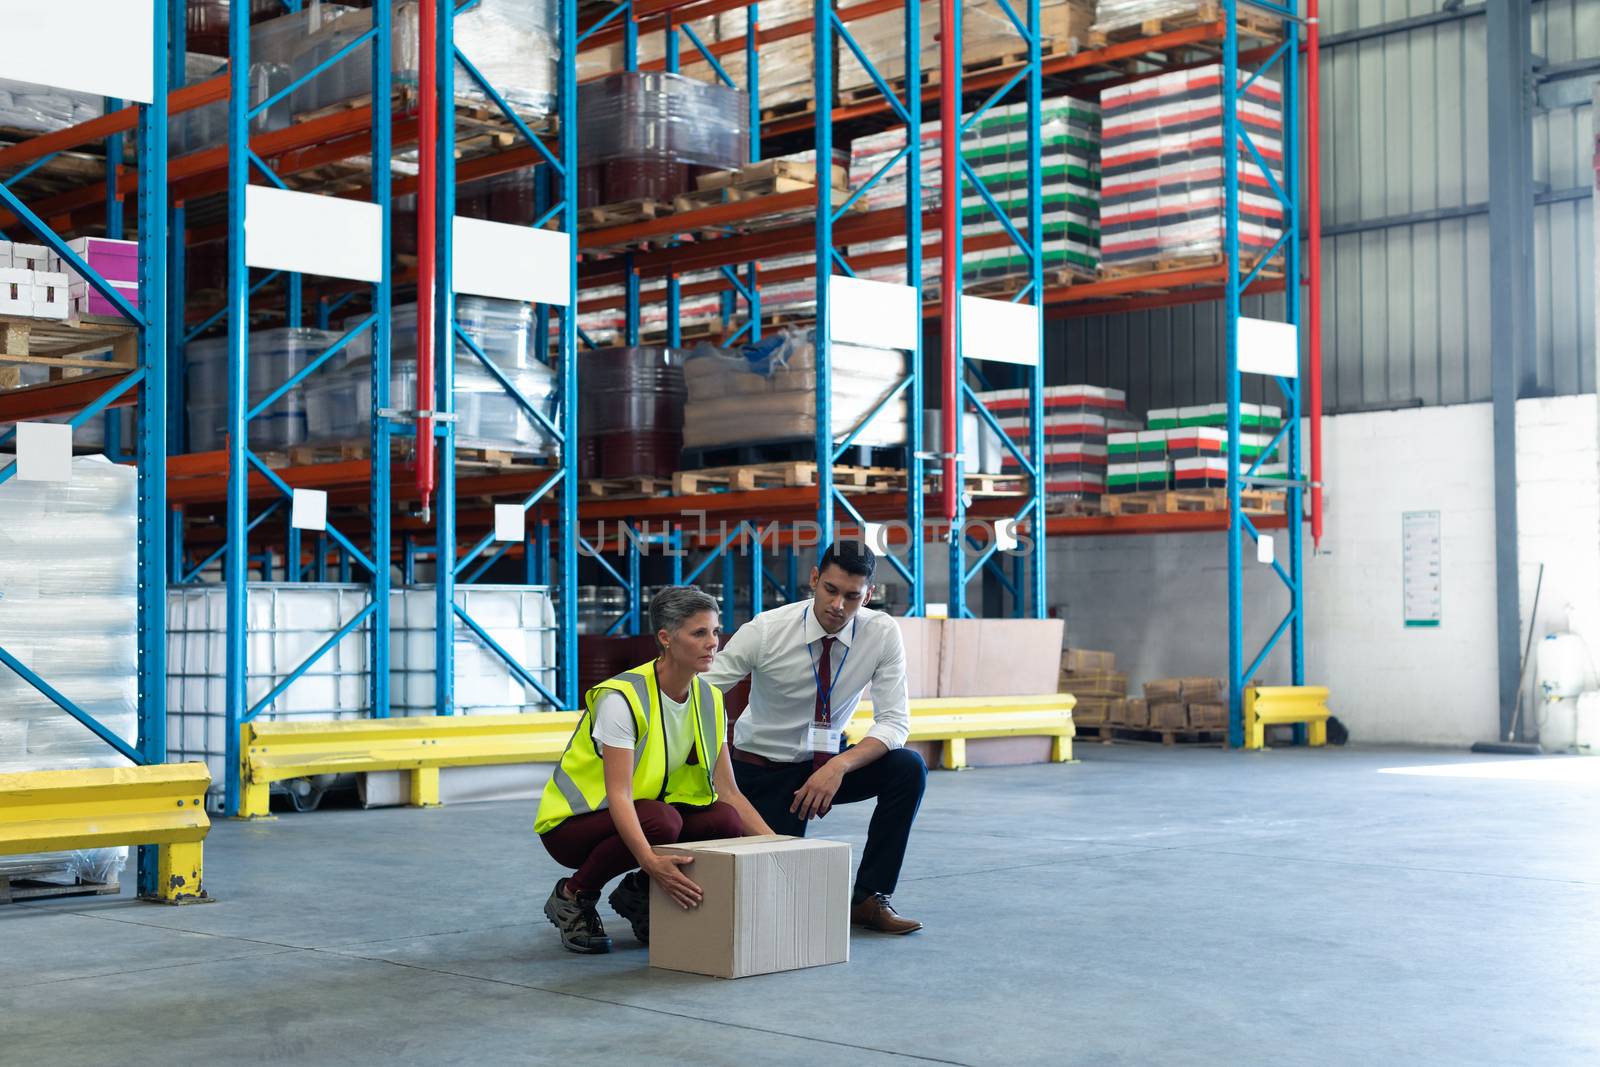 Large angle view of mixed-race Young male staff giving training to Caucasian female staff in warehouse. This is a freight transportation and distribution warehouse. Industrial and industrial workers concept